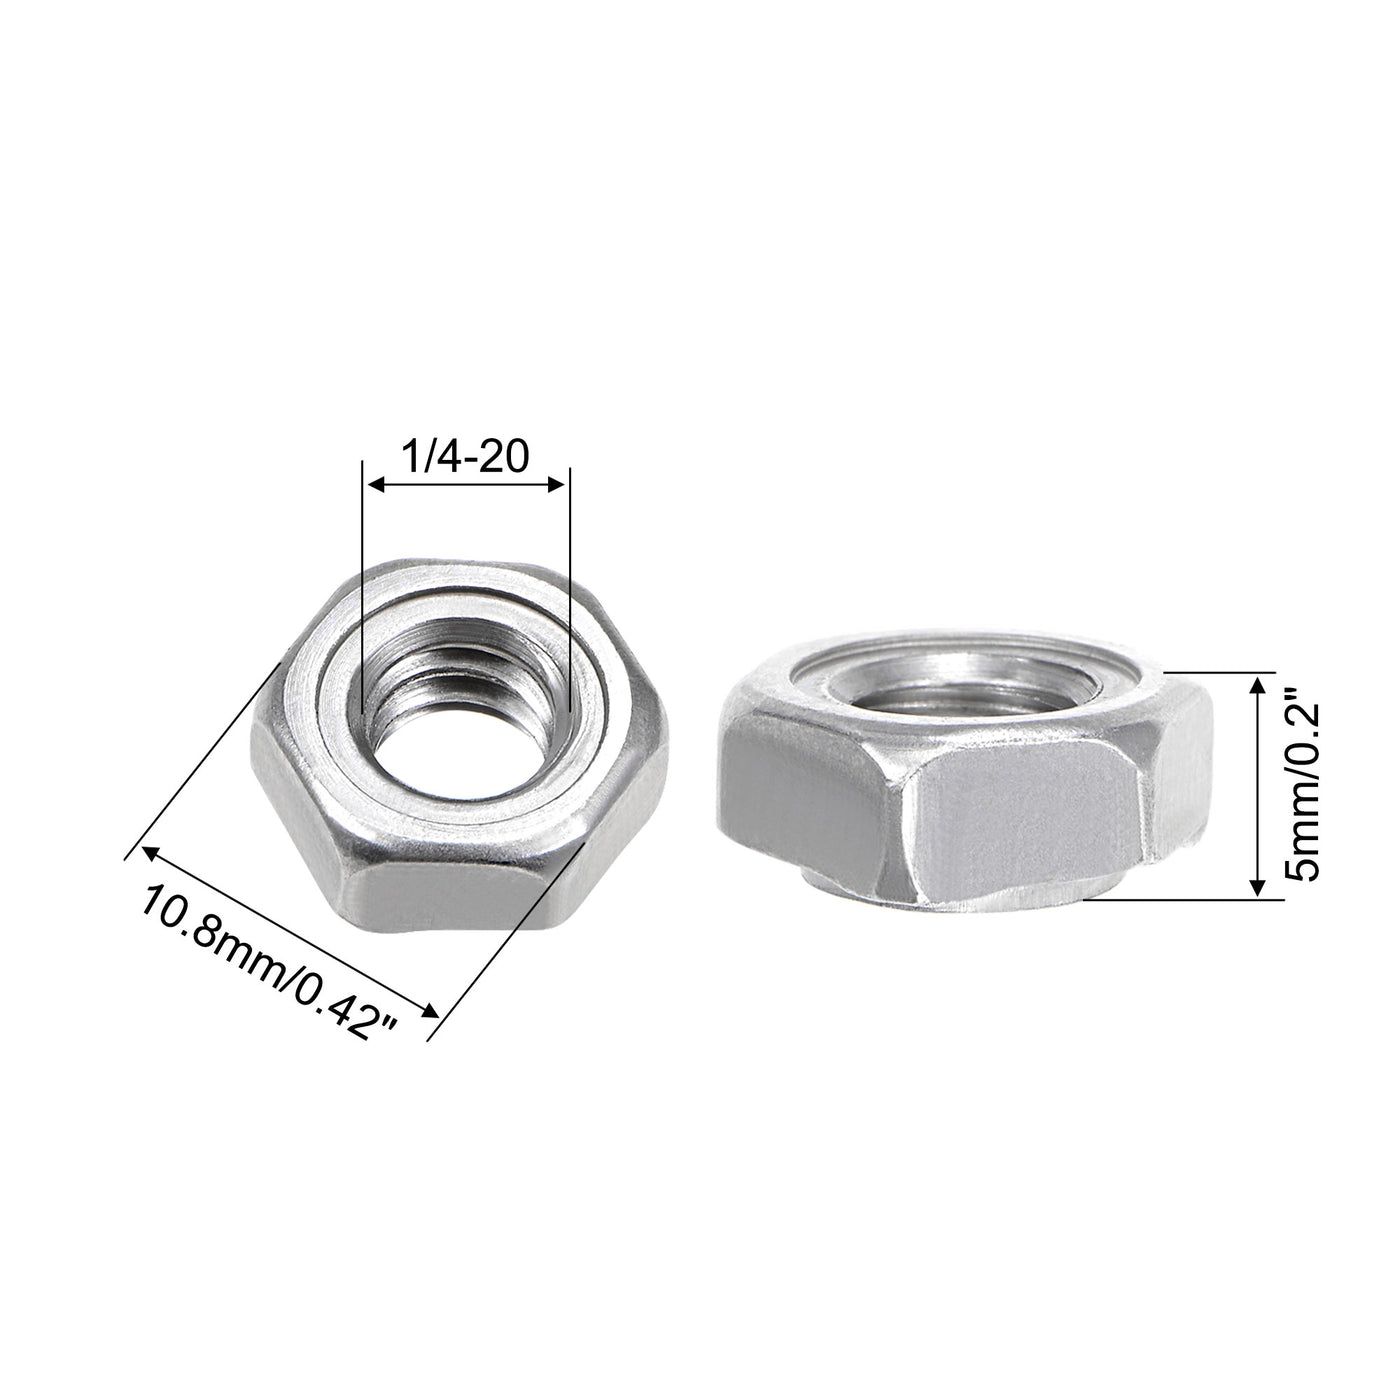 Uxcell Uxcell Hex Weld Nuts,1/2-13 Carbon Steel with 3 Projections Machine Screw Gray 20pcs